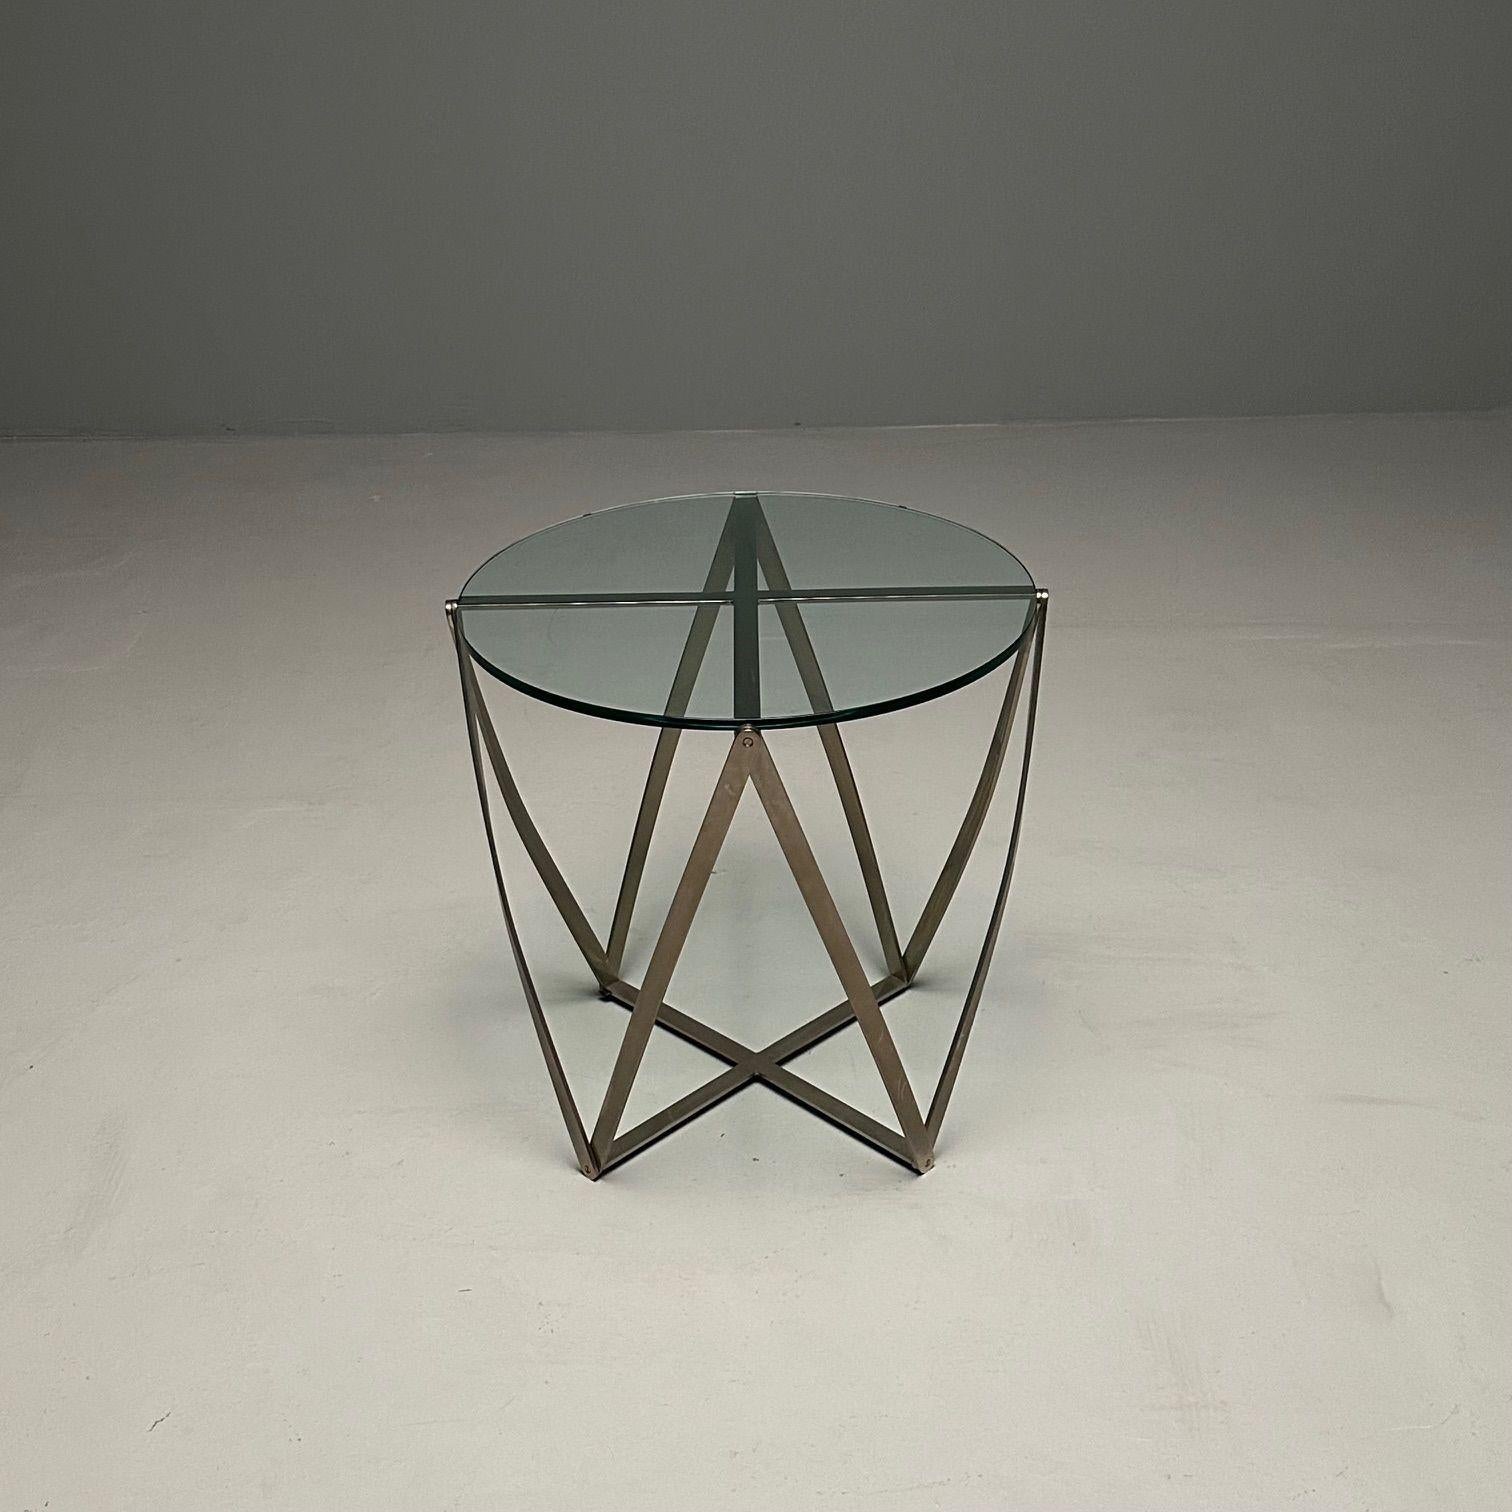 Circular Mid-Century Modern Aluminum Side / End Table by John Vesey, Sculptural
 
The 'Spool' table by John Vesey designed and produced in the United States, c. 1970s. This table is based on a 19th century wool winder, used in the production of